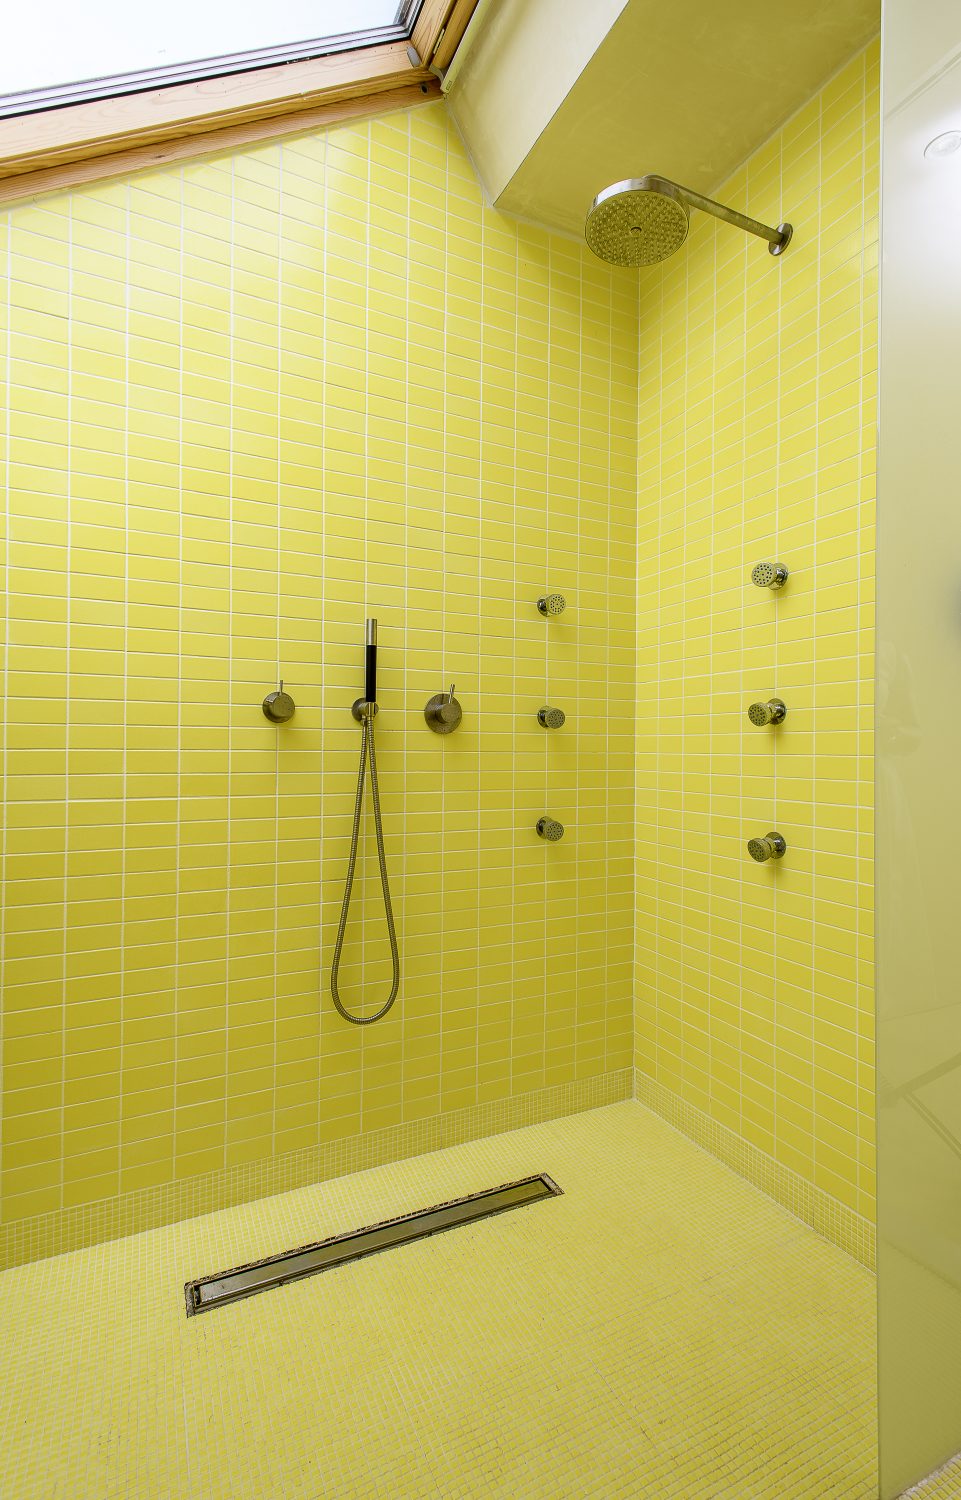 A shower area tiled entirely in yellow